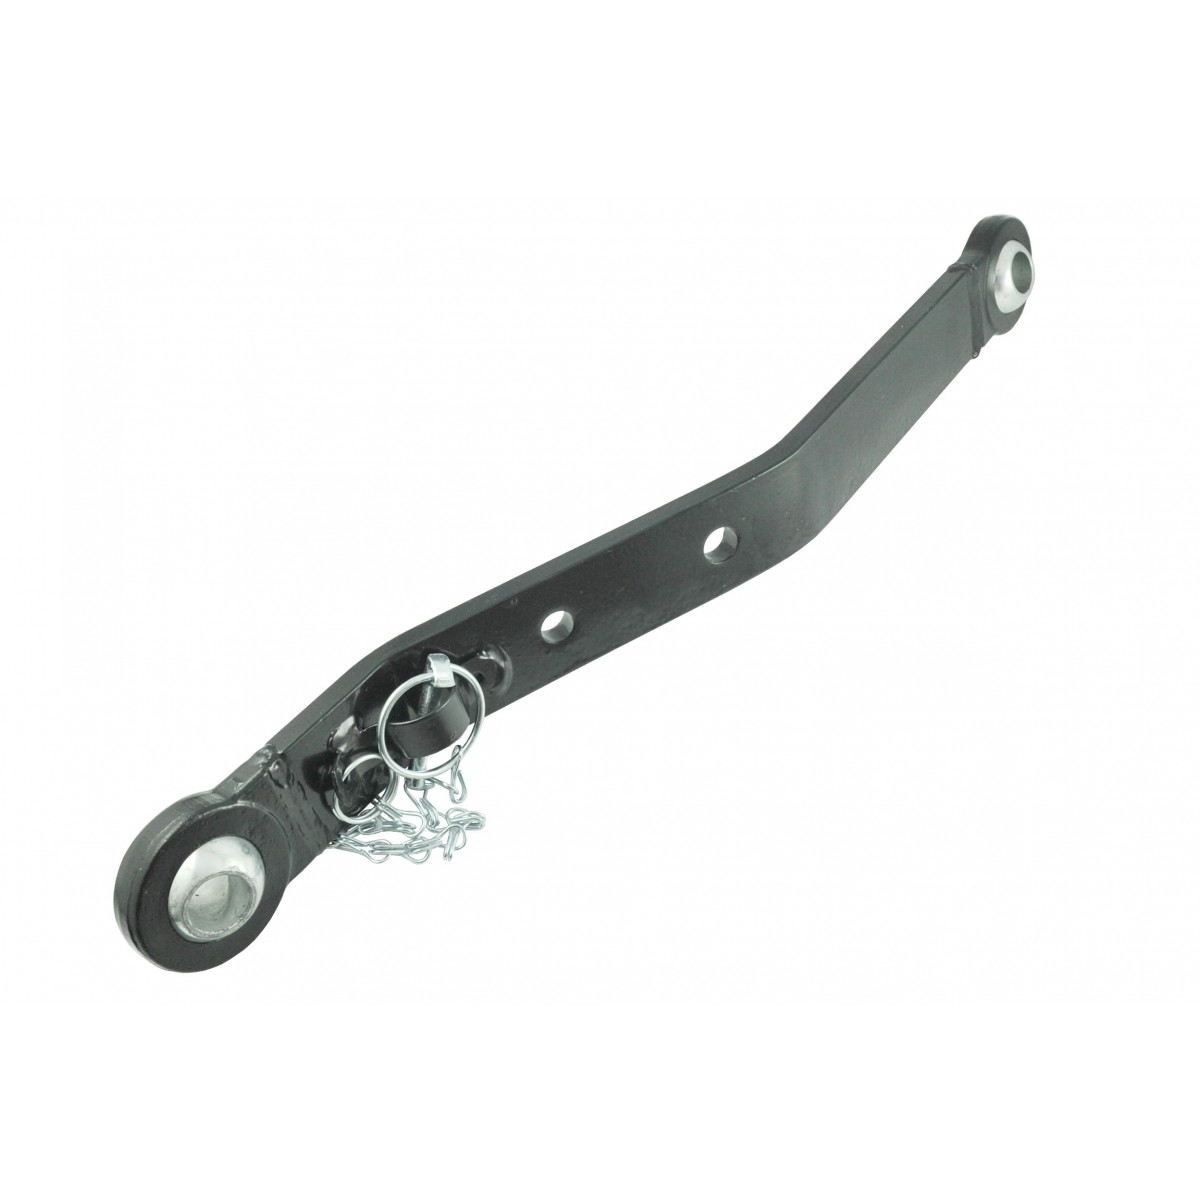 Linkage arm 3-point linkage lower 500 mm 16 "rear linkage KAT 1/1 right / left